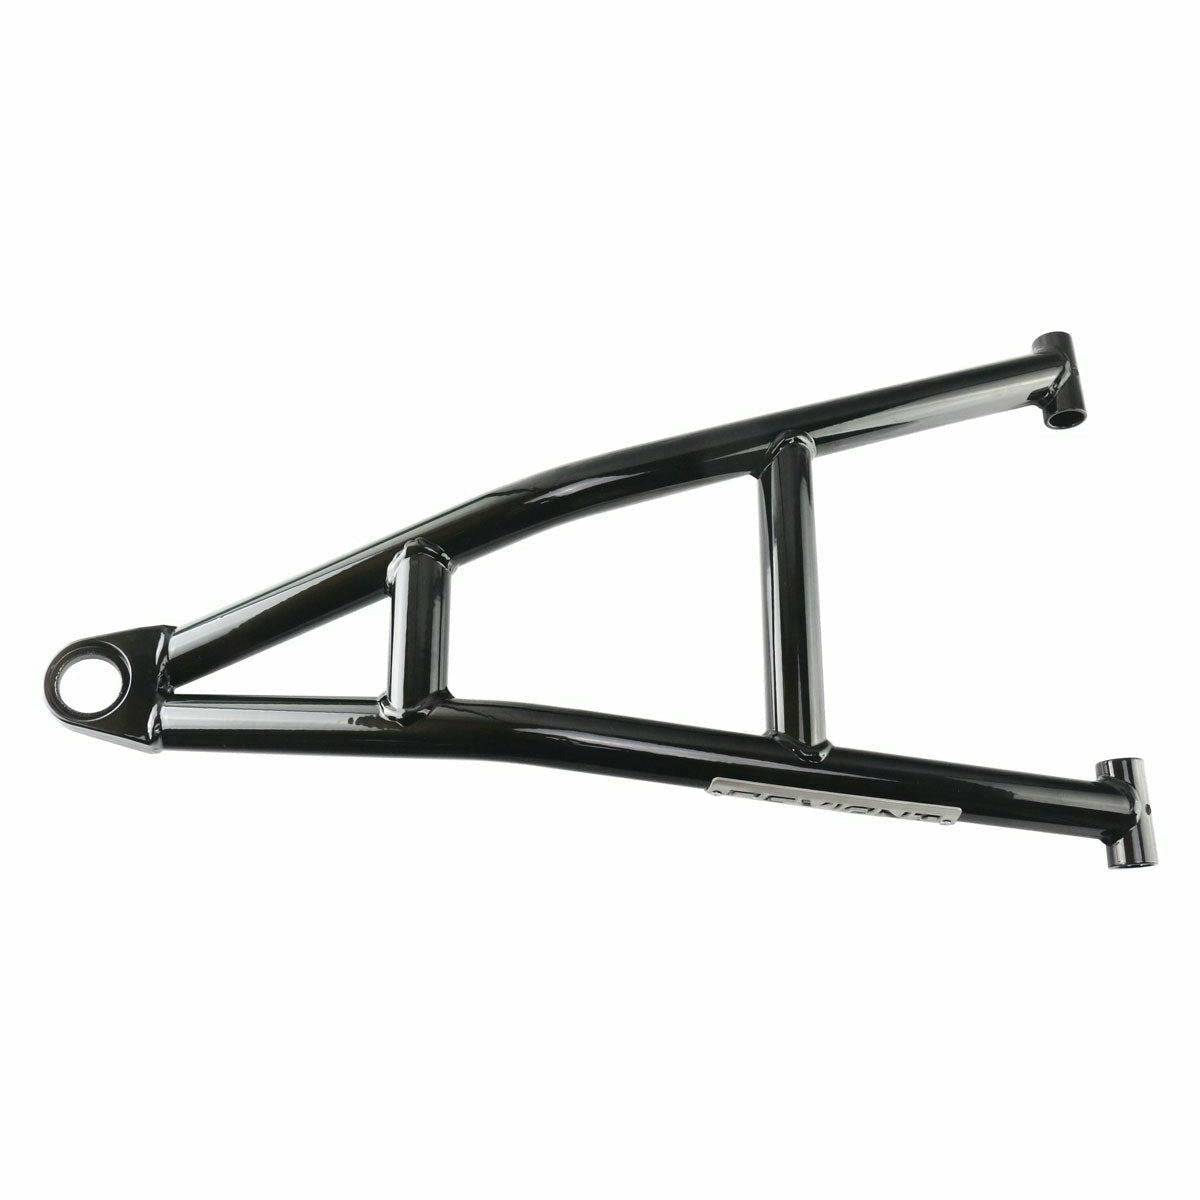 Deviant Polaris RZR XP 1000/Turbo (2014-2019) High Clearance Lower Control Arms - Kombustion Motorsports